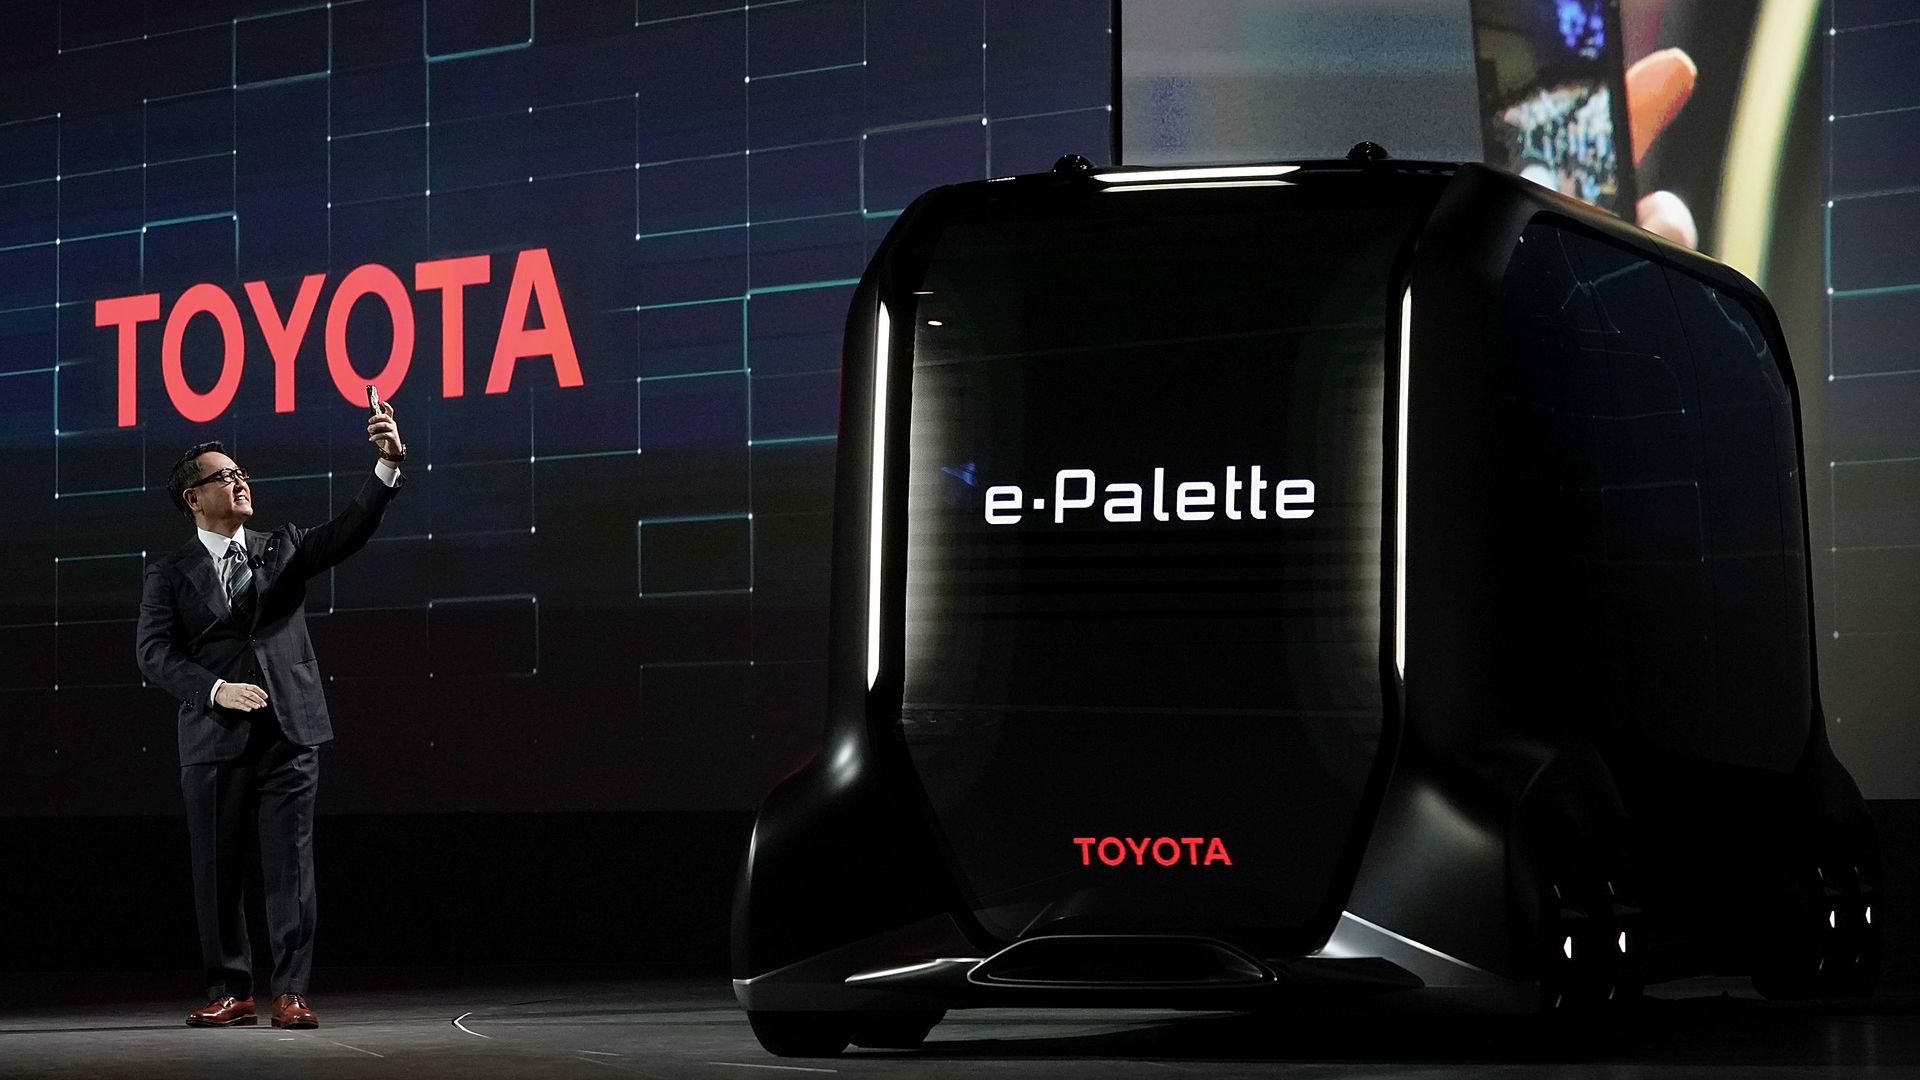 President of Toyota Motor Corporation and the e-Palette Concept Vehicle.